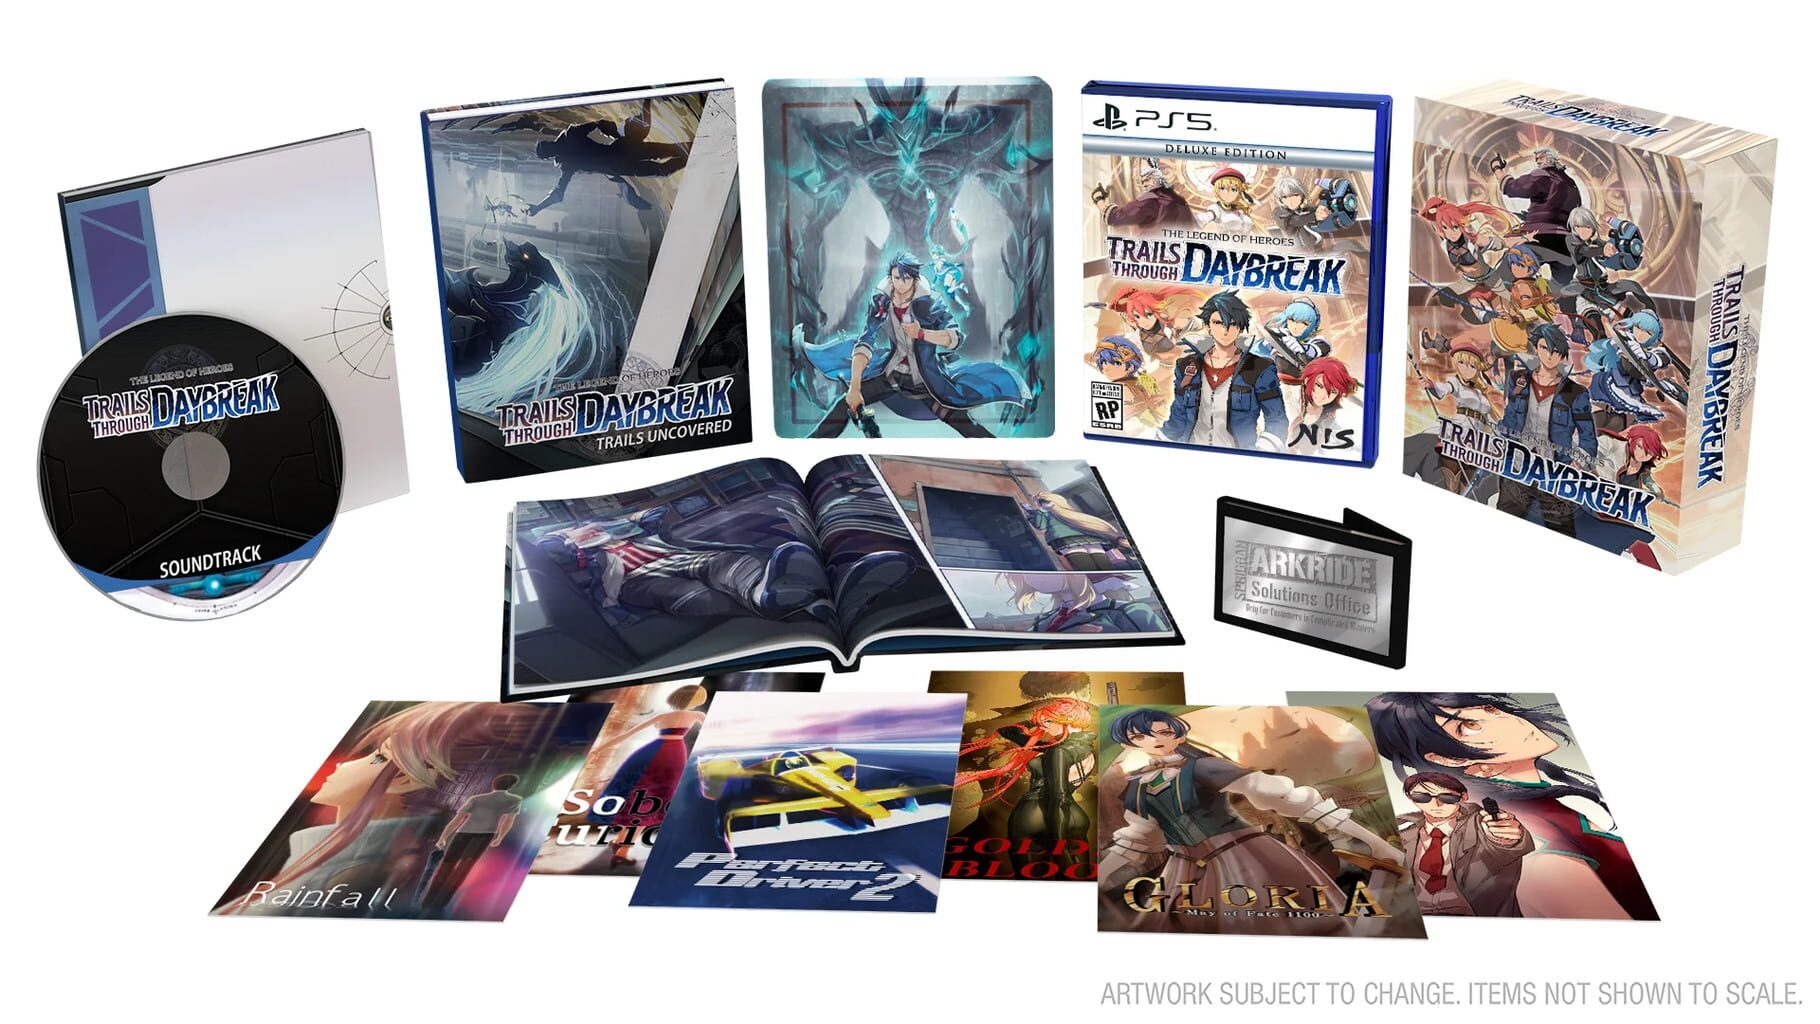 Artwork for The Legend of Heroes: Trails through Daybreak - Limited Edition